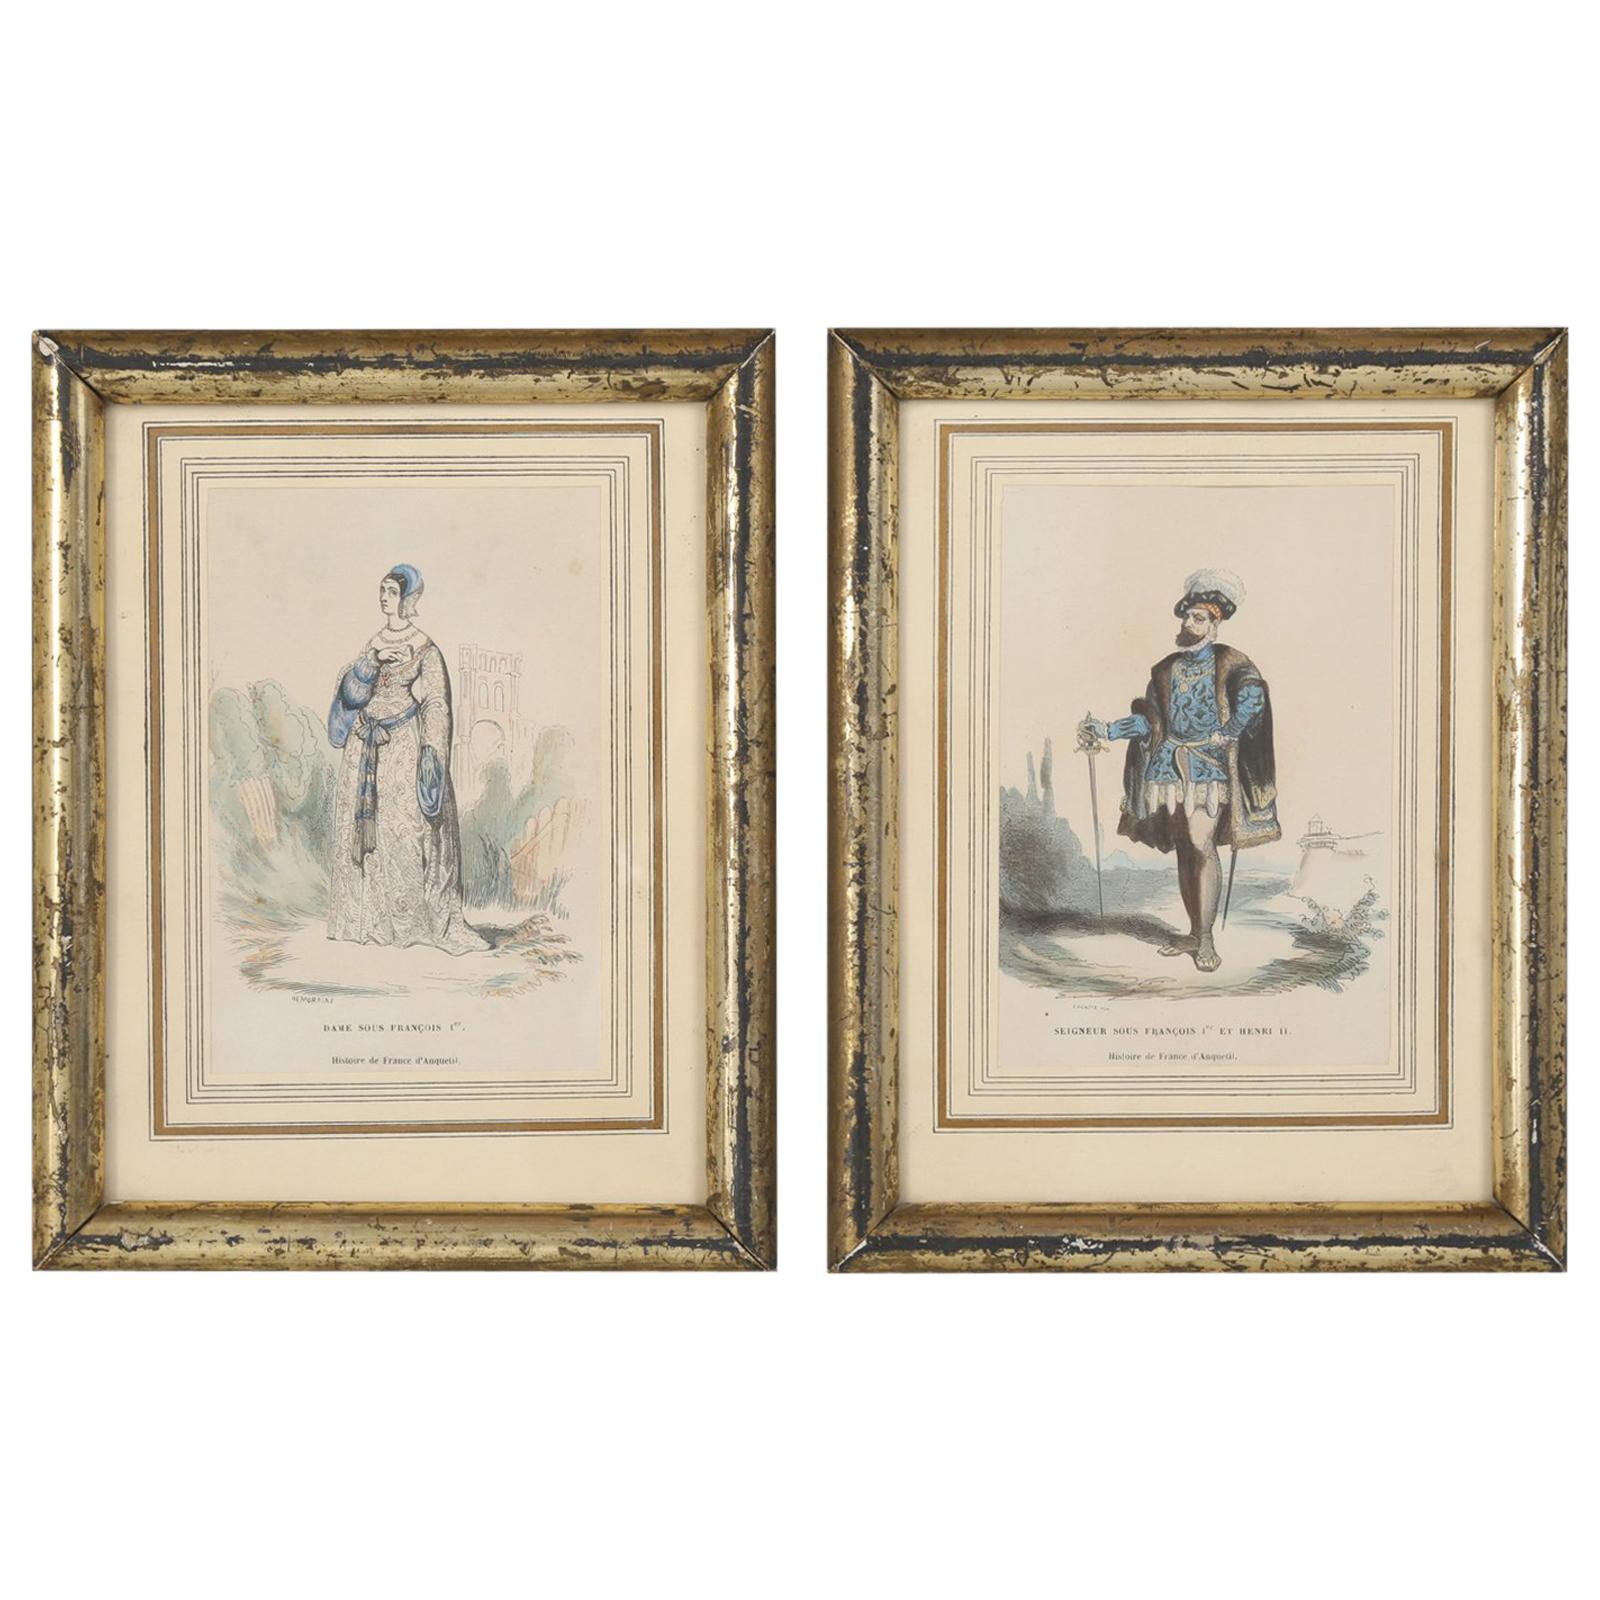 Pair of Antique Tres Petite French Prints, Hand-Colored 